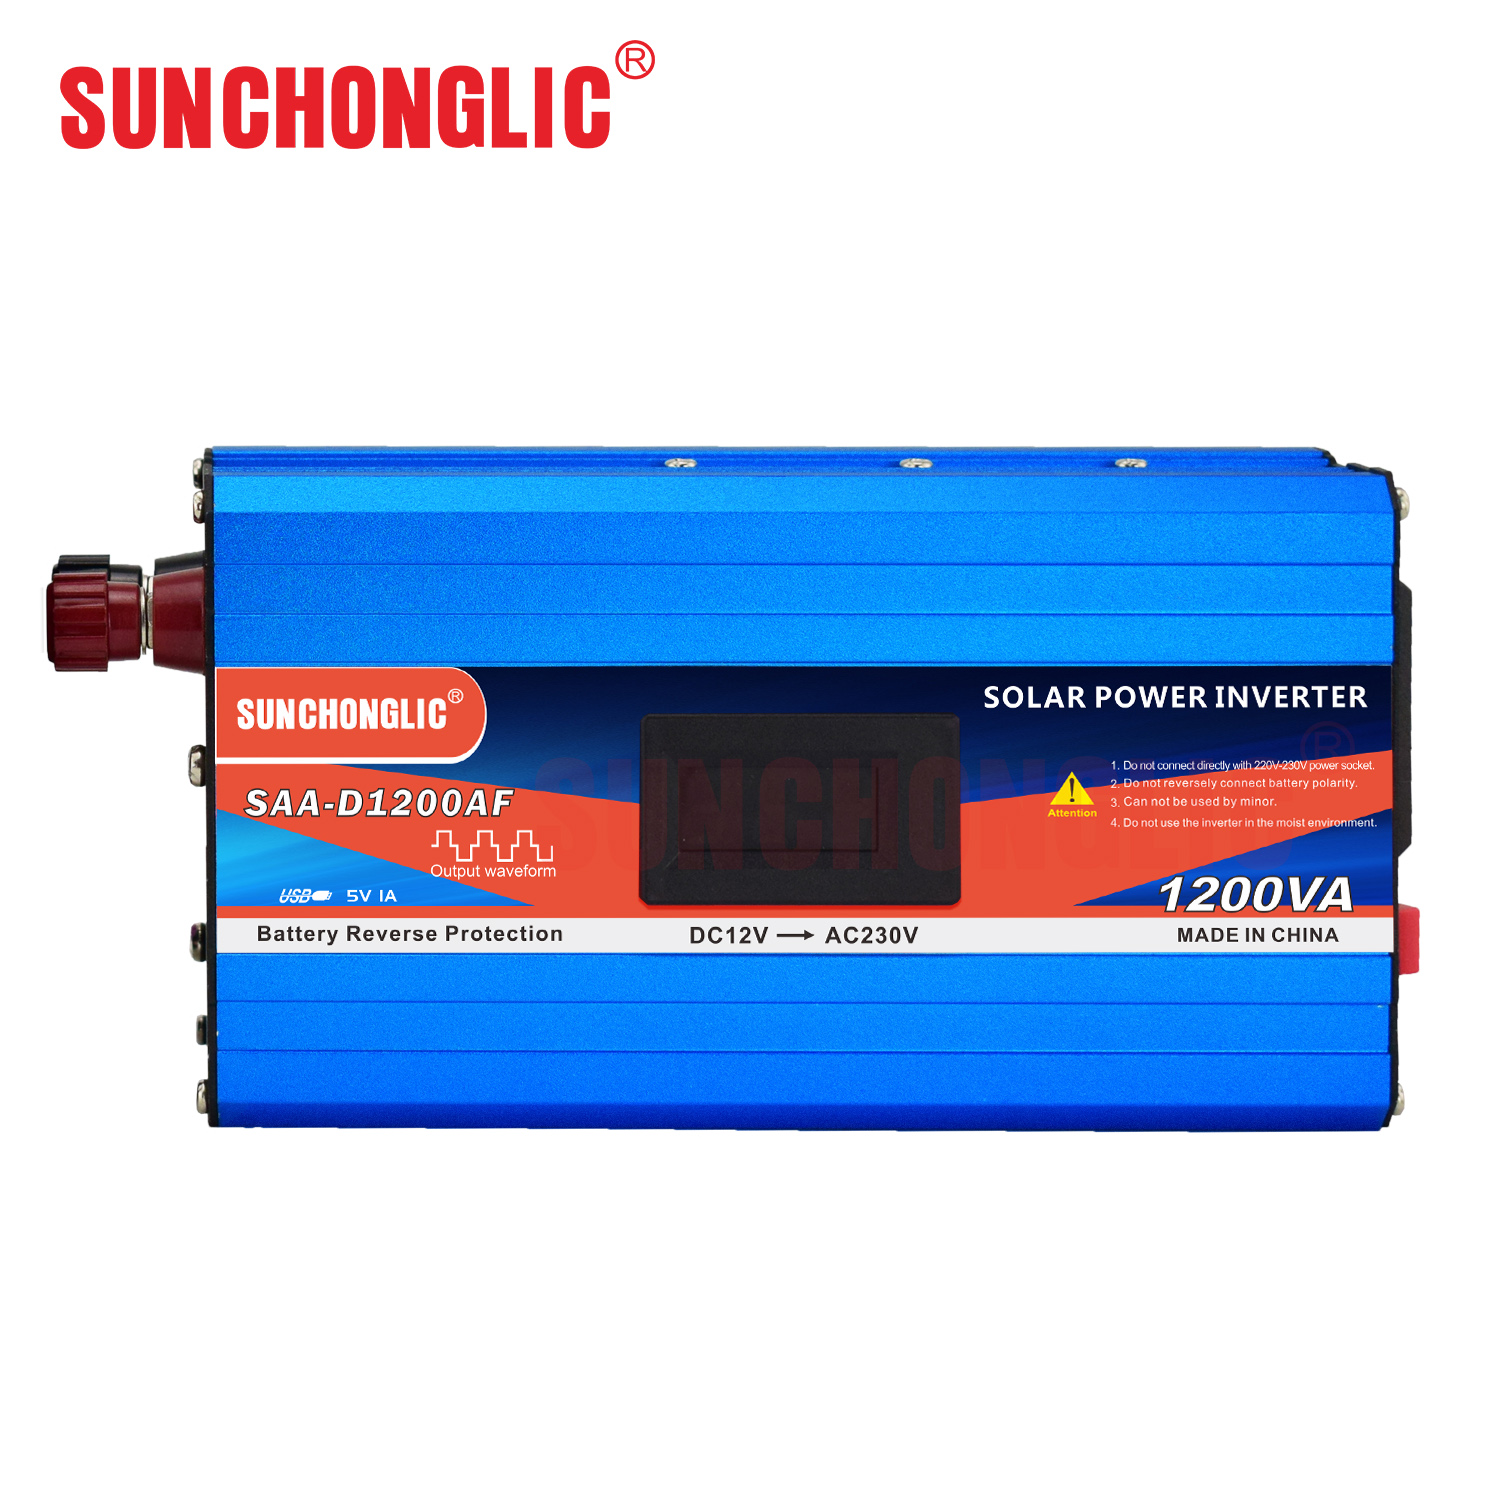 Sine Wave SAA-D1200AF - Foshan - Electric Sunchonglic Modified Co., Appliance Inverter